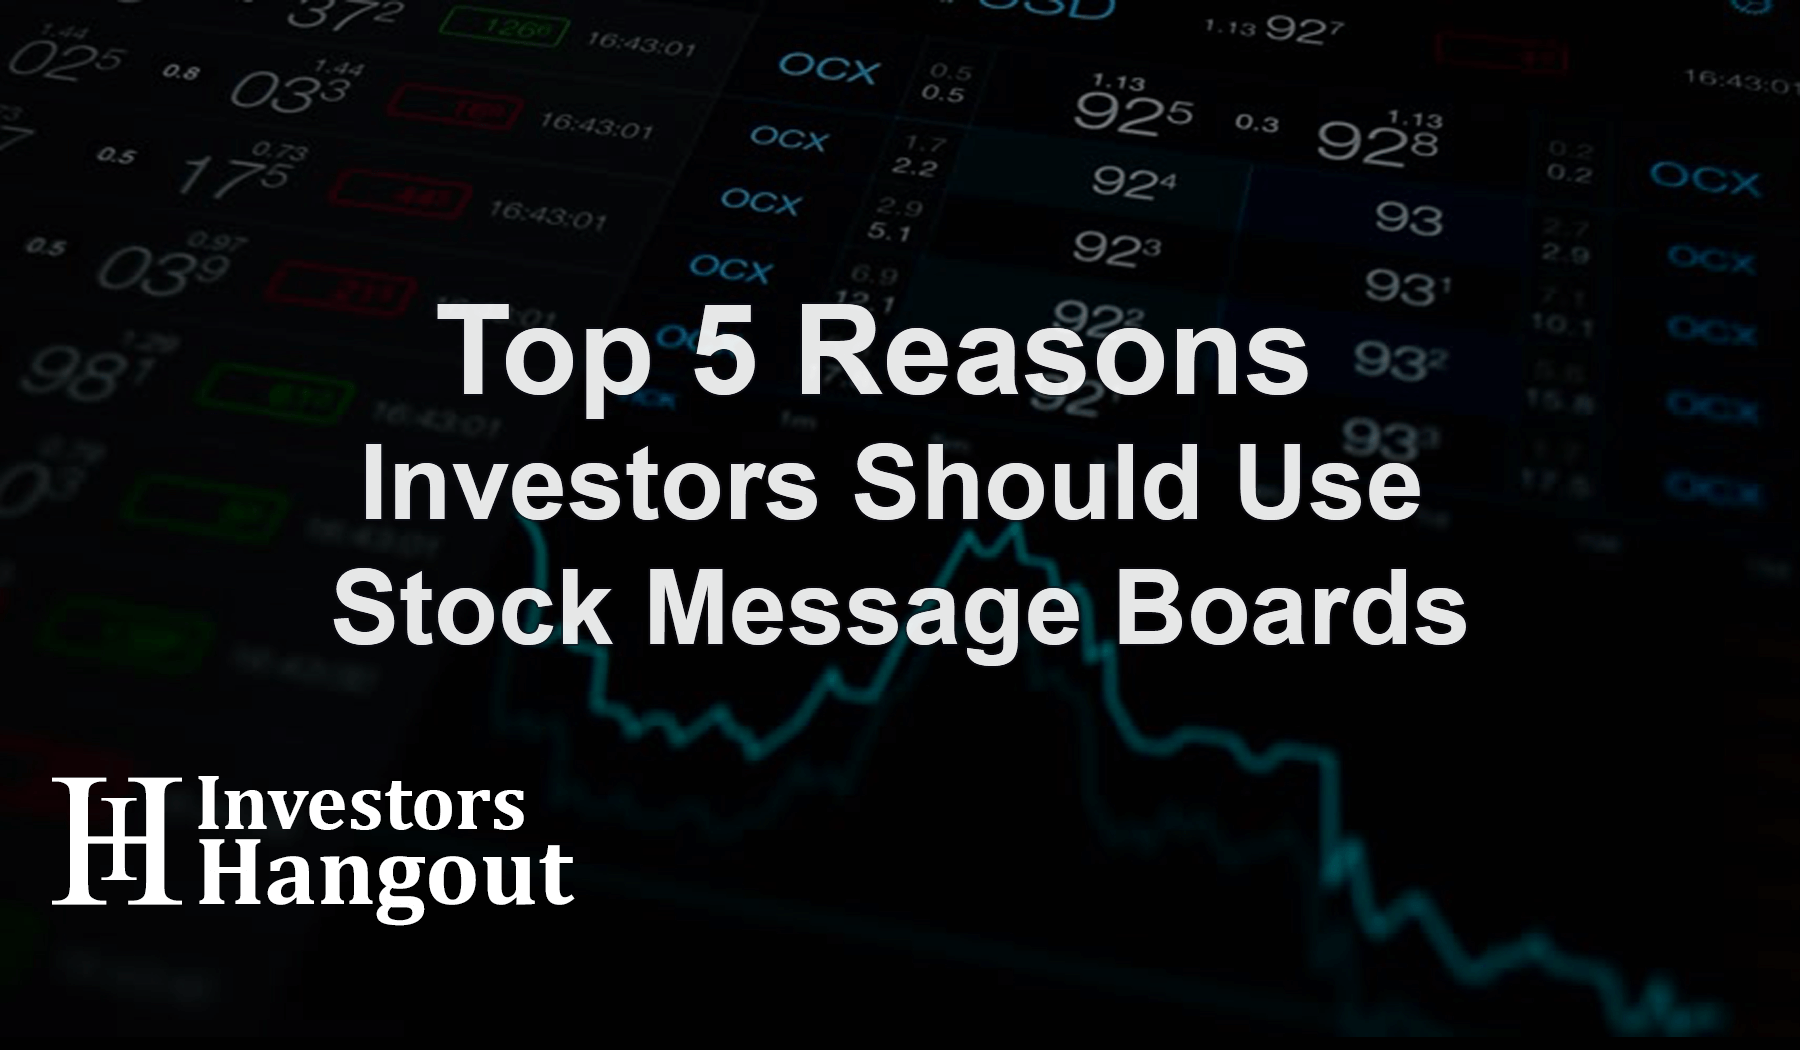 Top 5 Reasons Investors Should Use Stock Message Boards